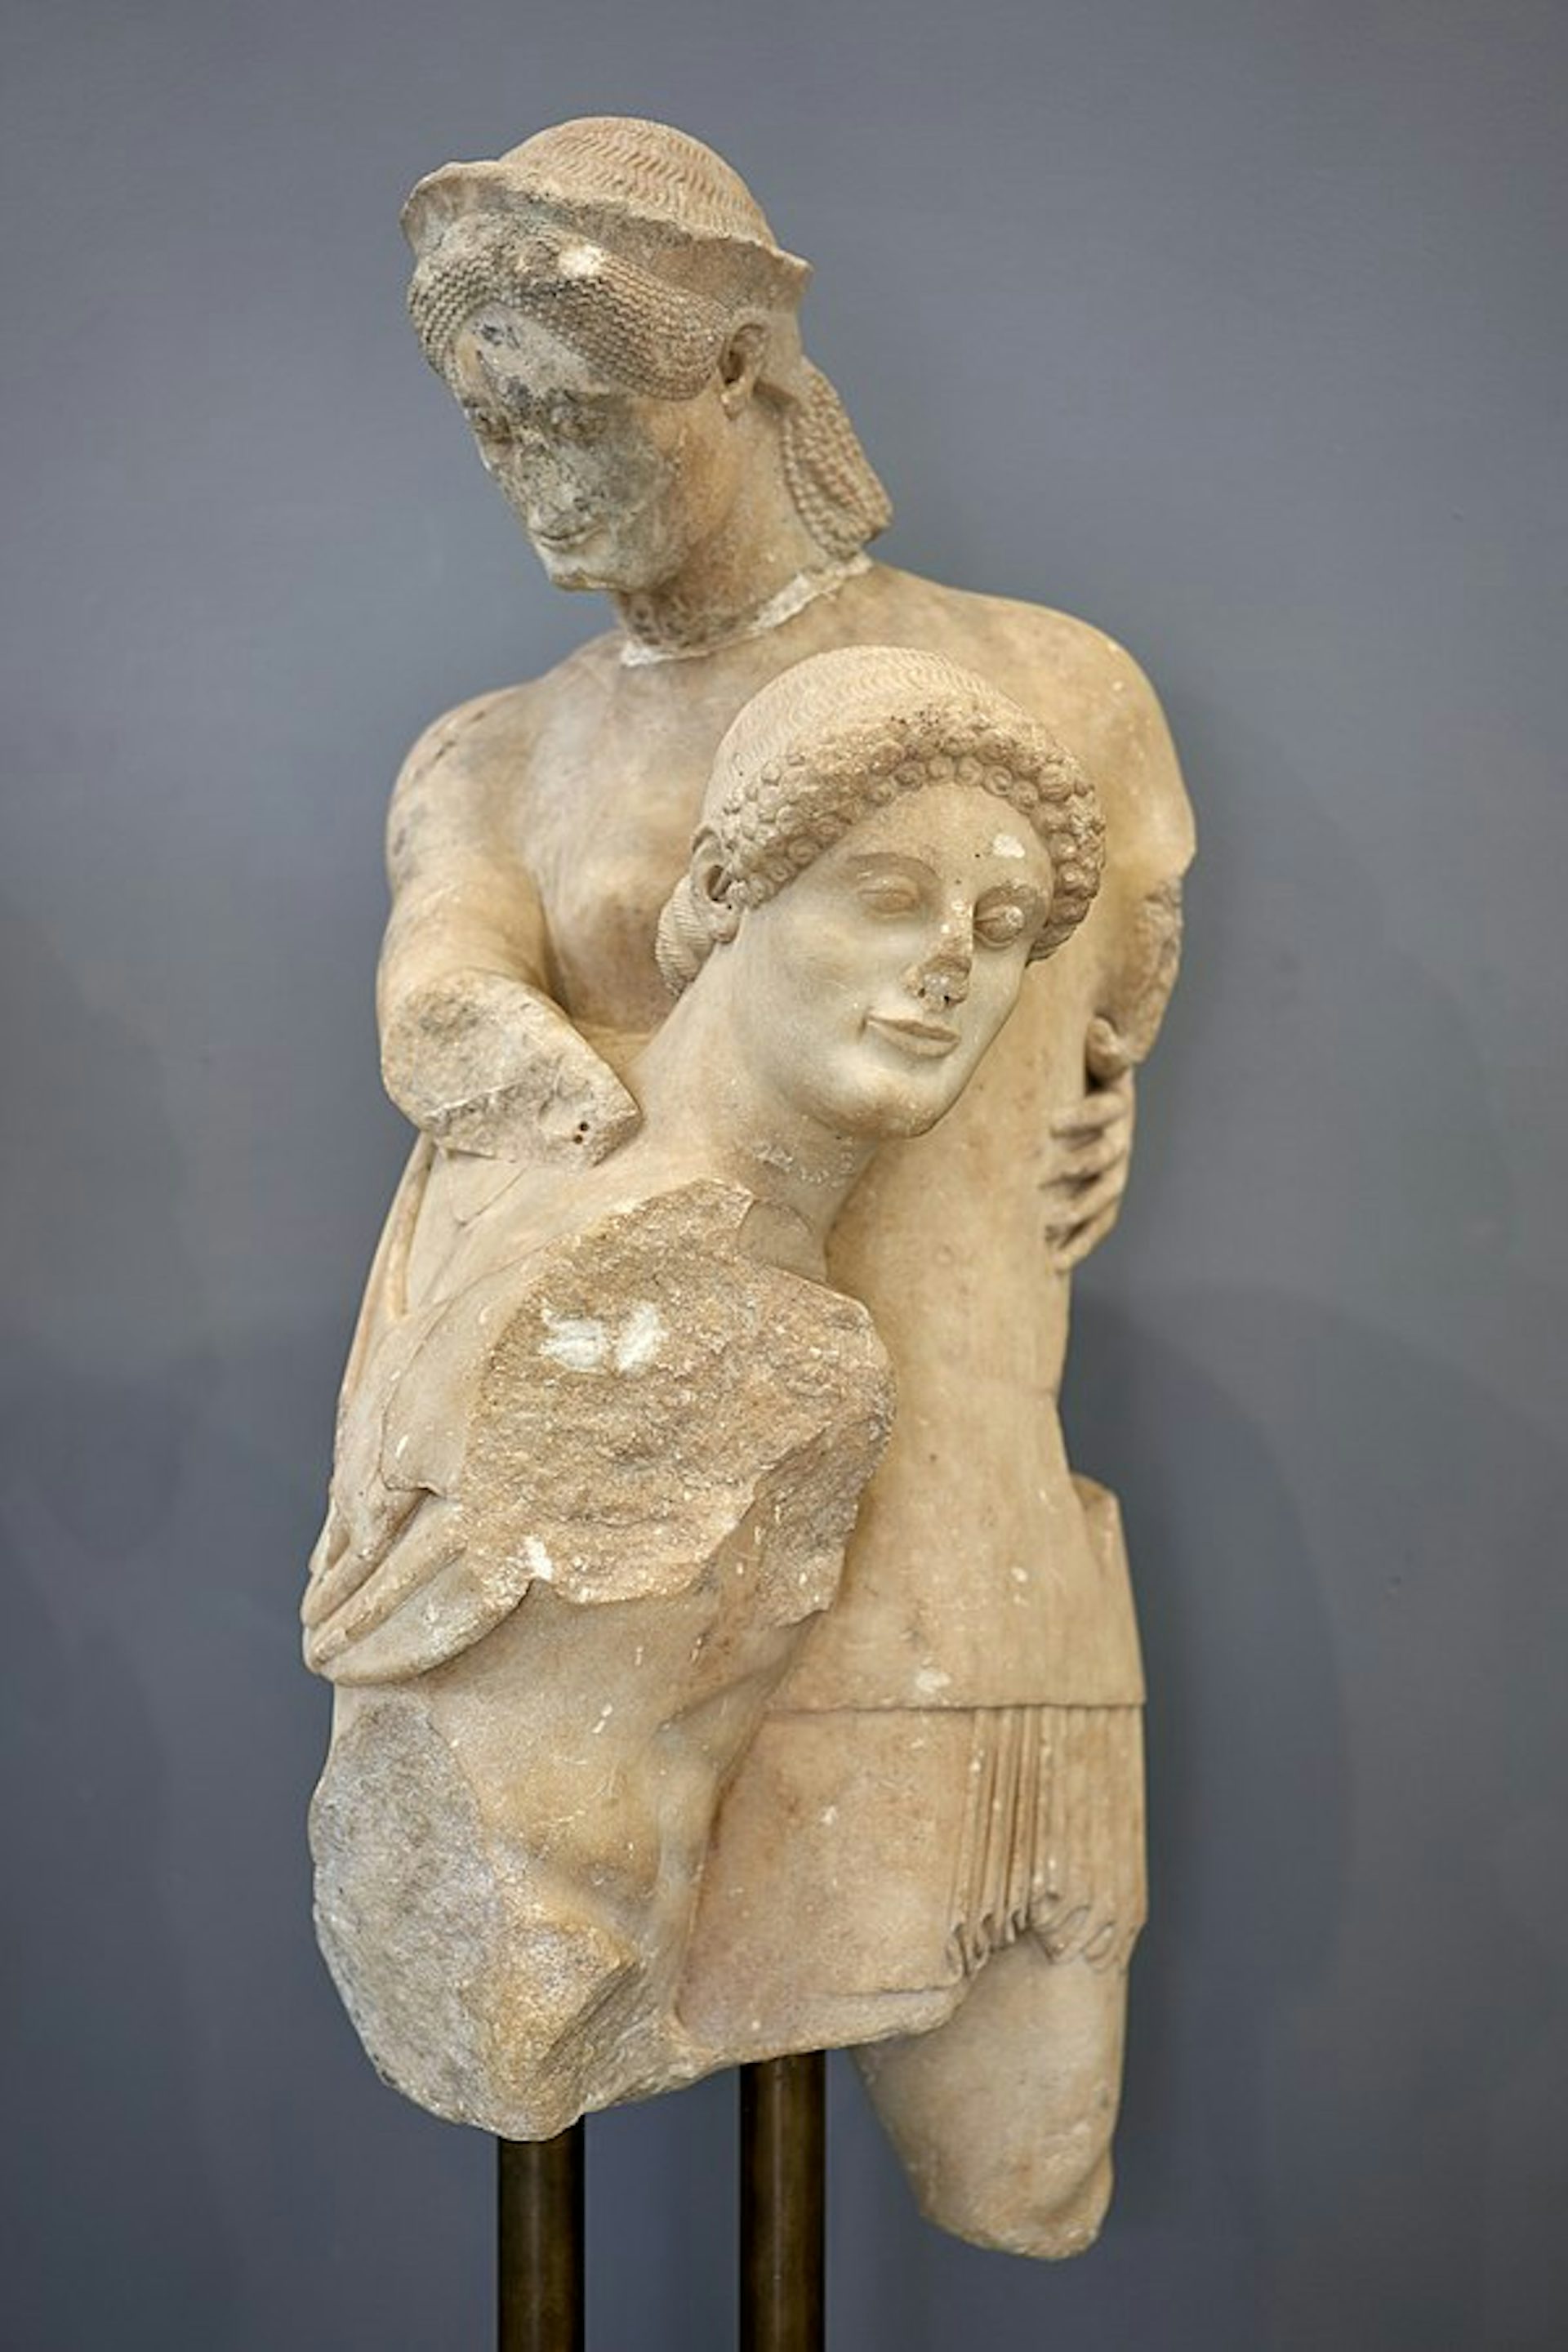 The abduction of Antiope by Theseus, 5th cent. B.C.